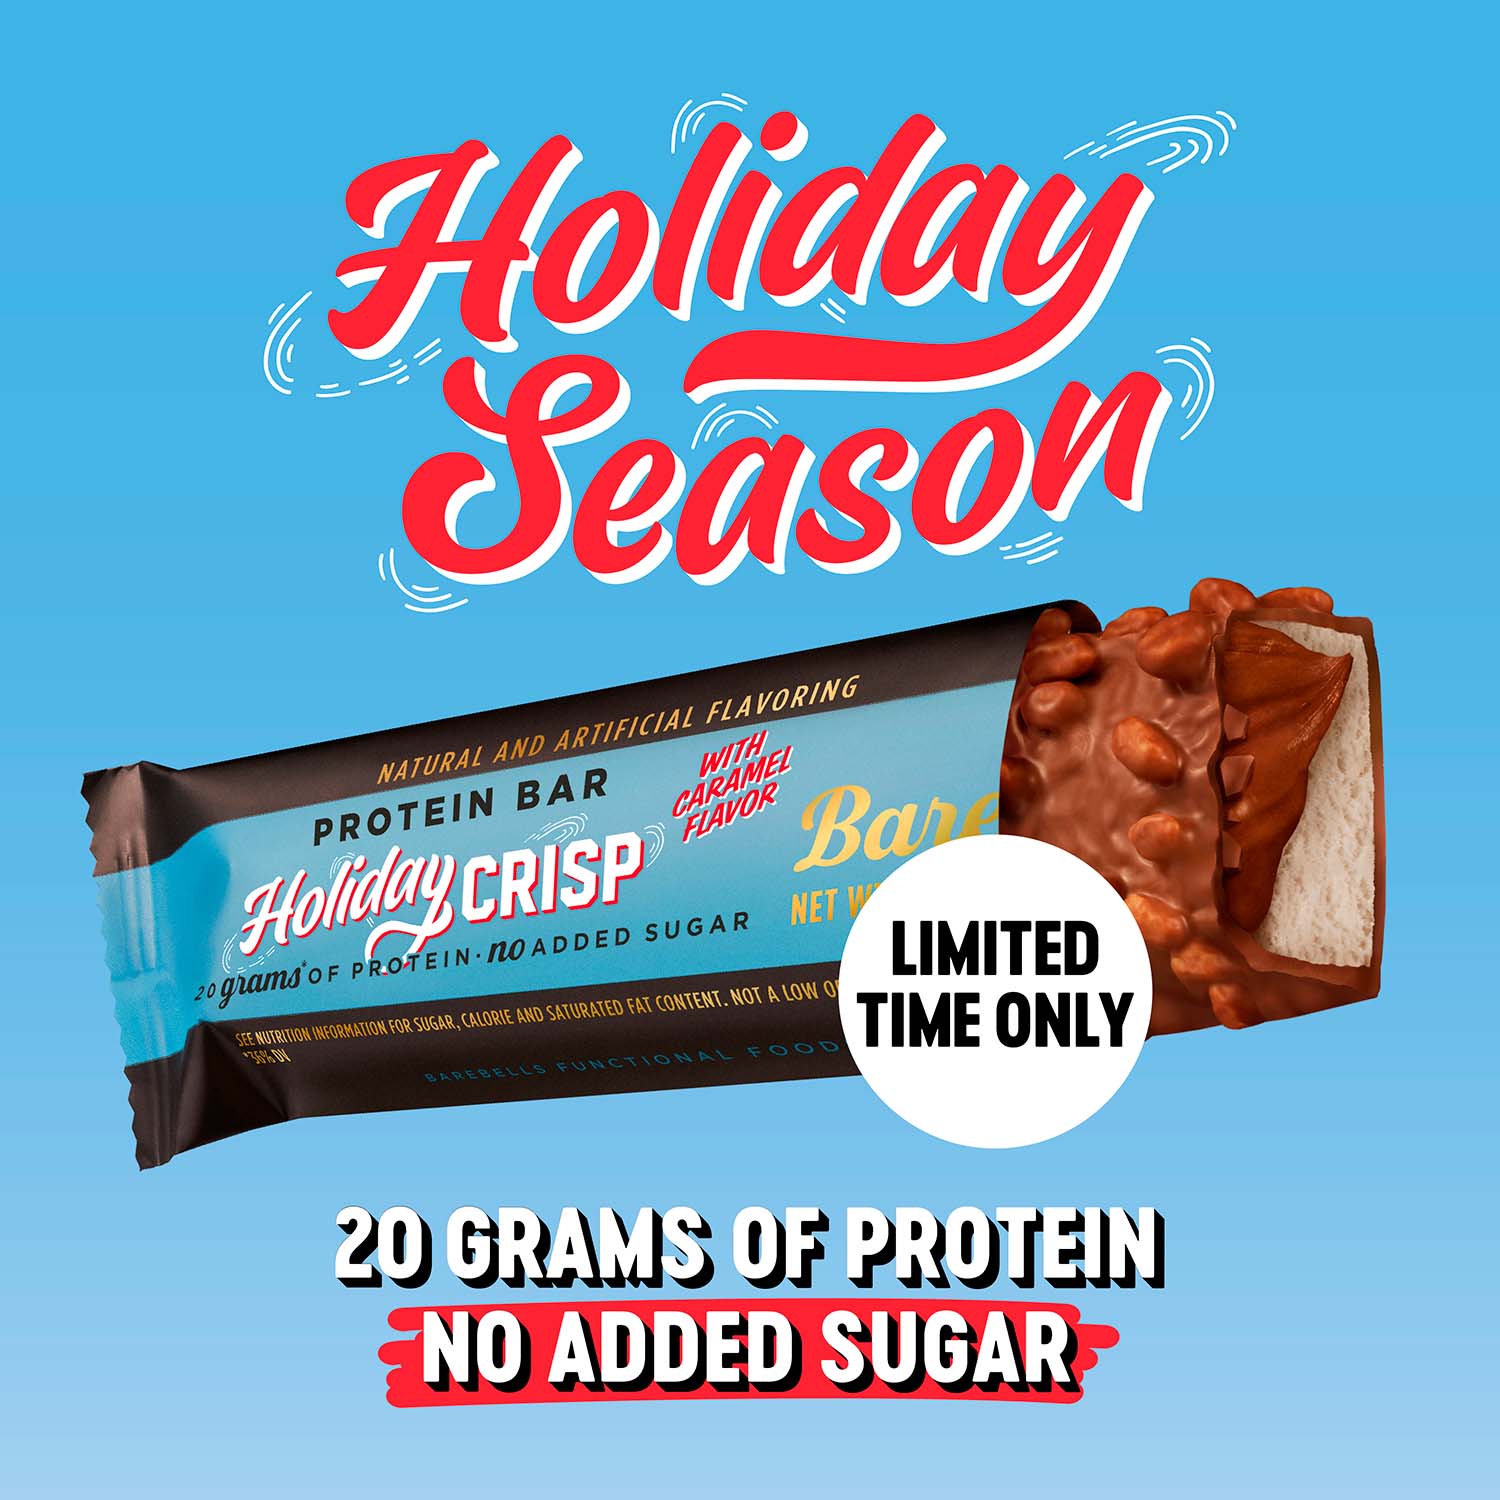 Our new limited edition holiday season drop is here!